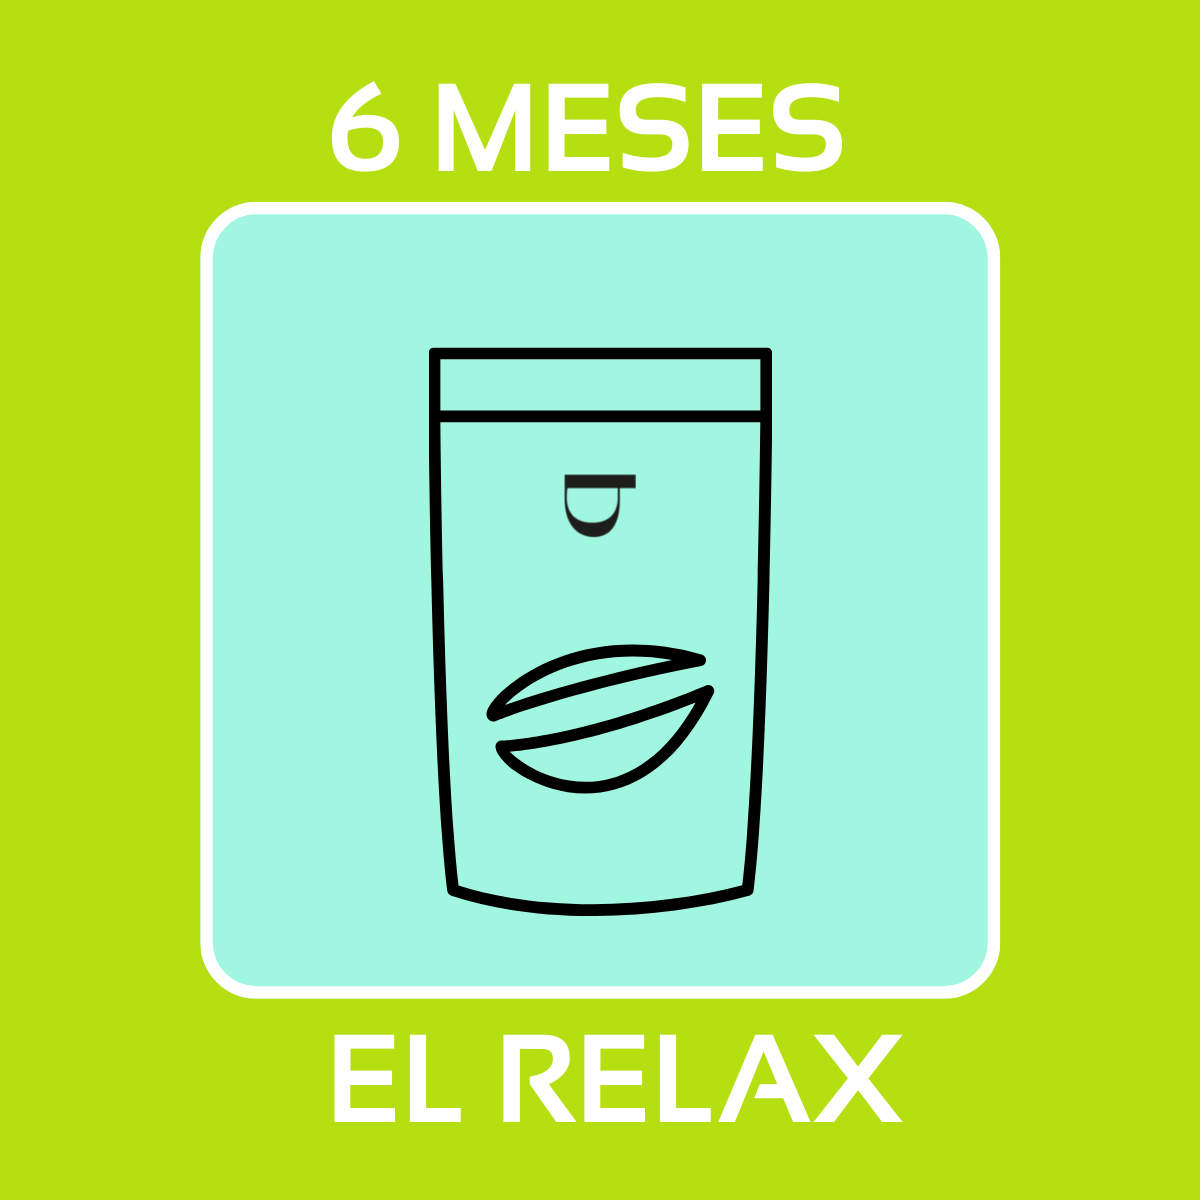 RELAX 6 MESES